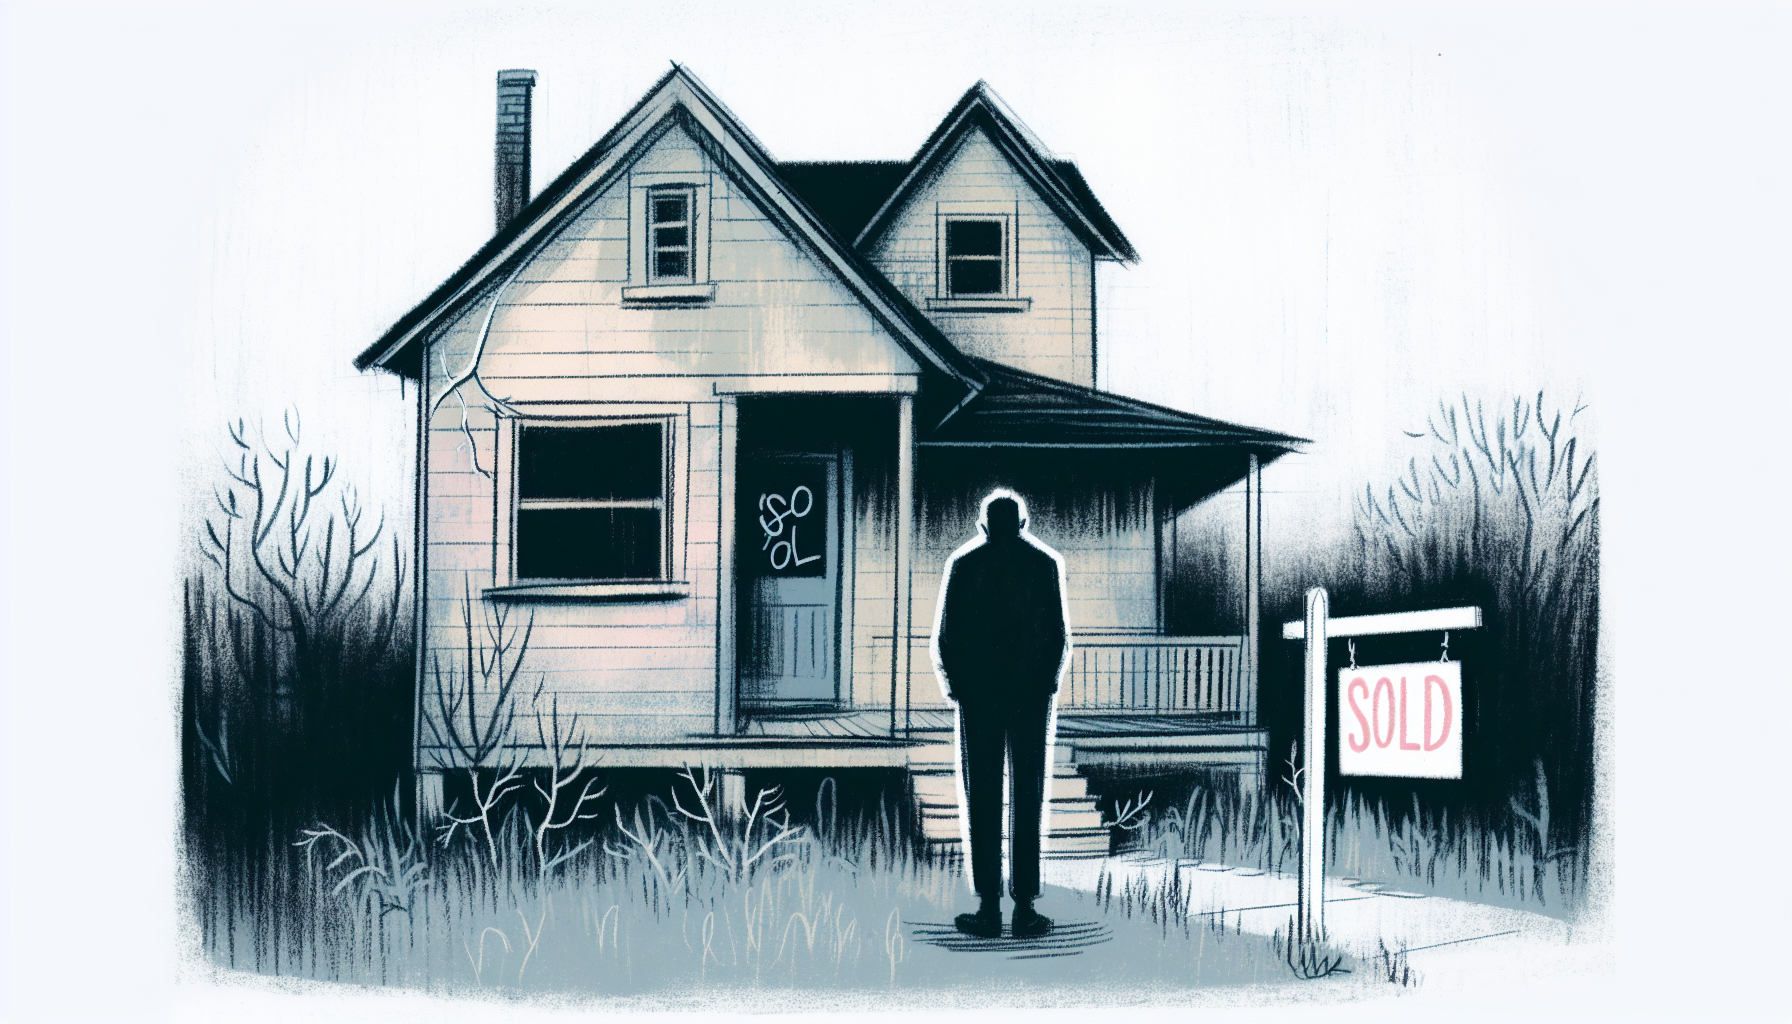 Illustration of a person looking at a sold sign outside a house, symbolizing post-foreclosure actions